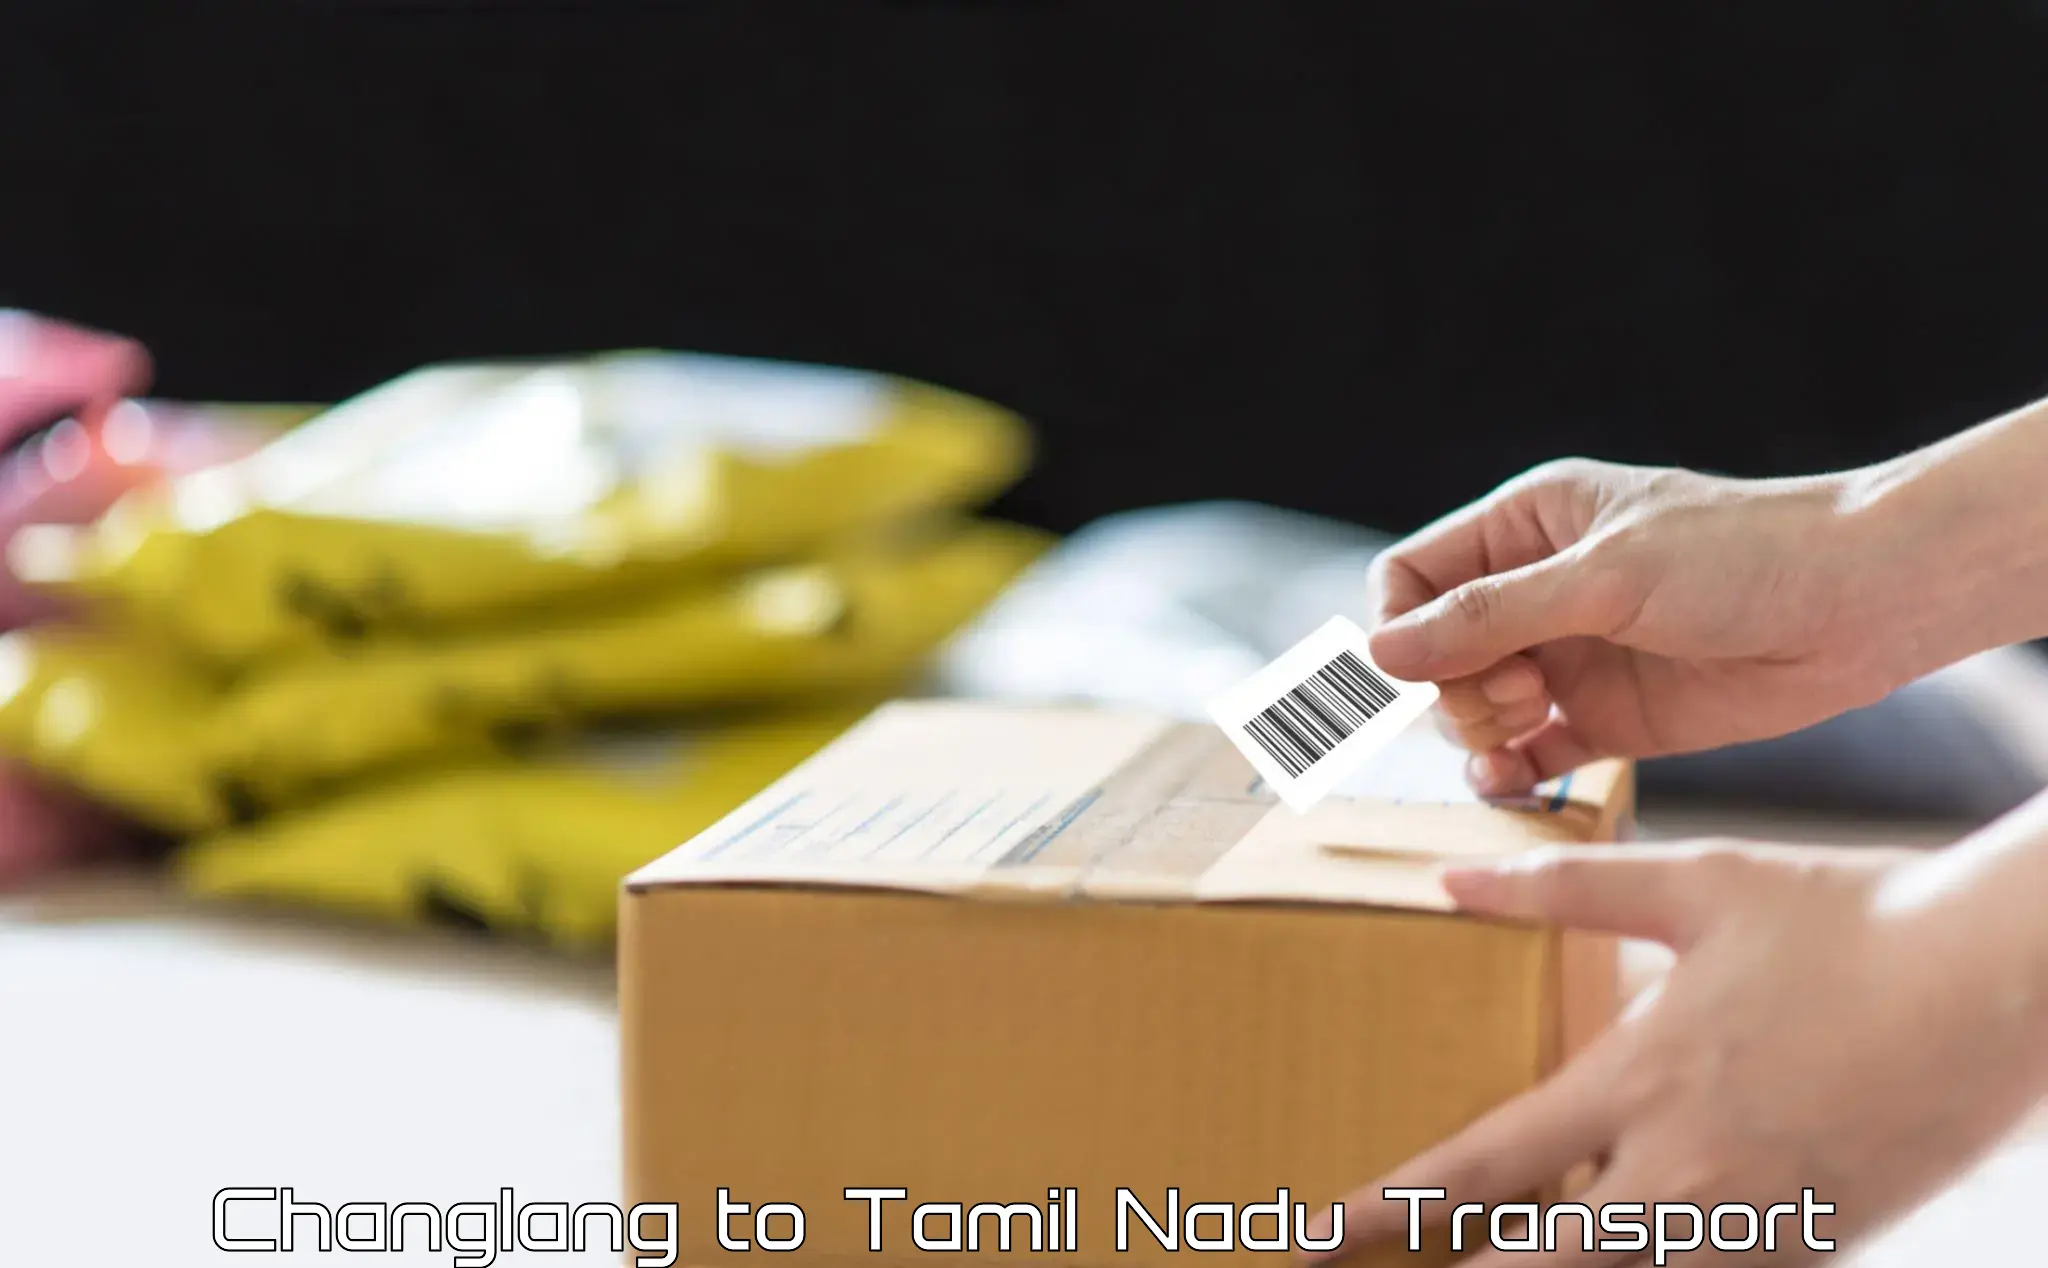 Shipping services Changlang to University of Madras Chennai